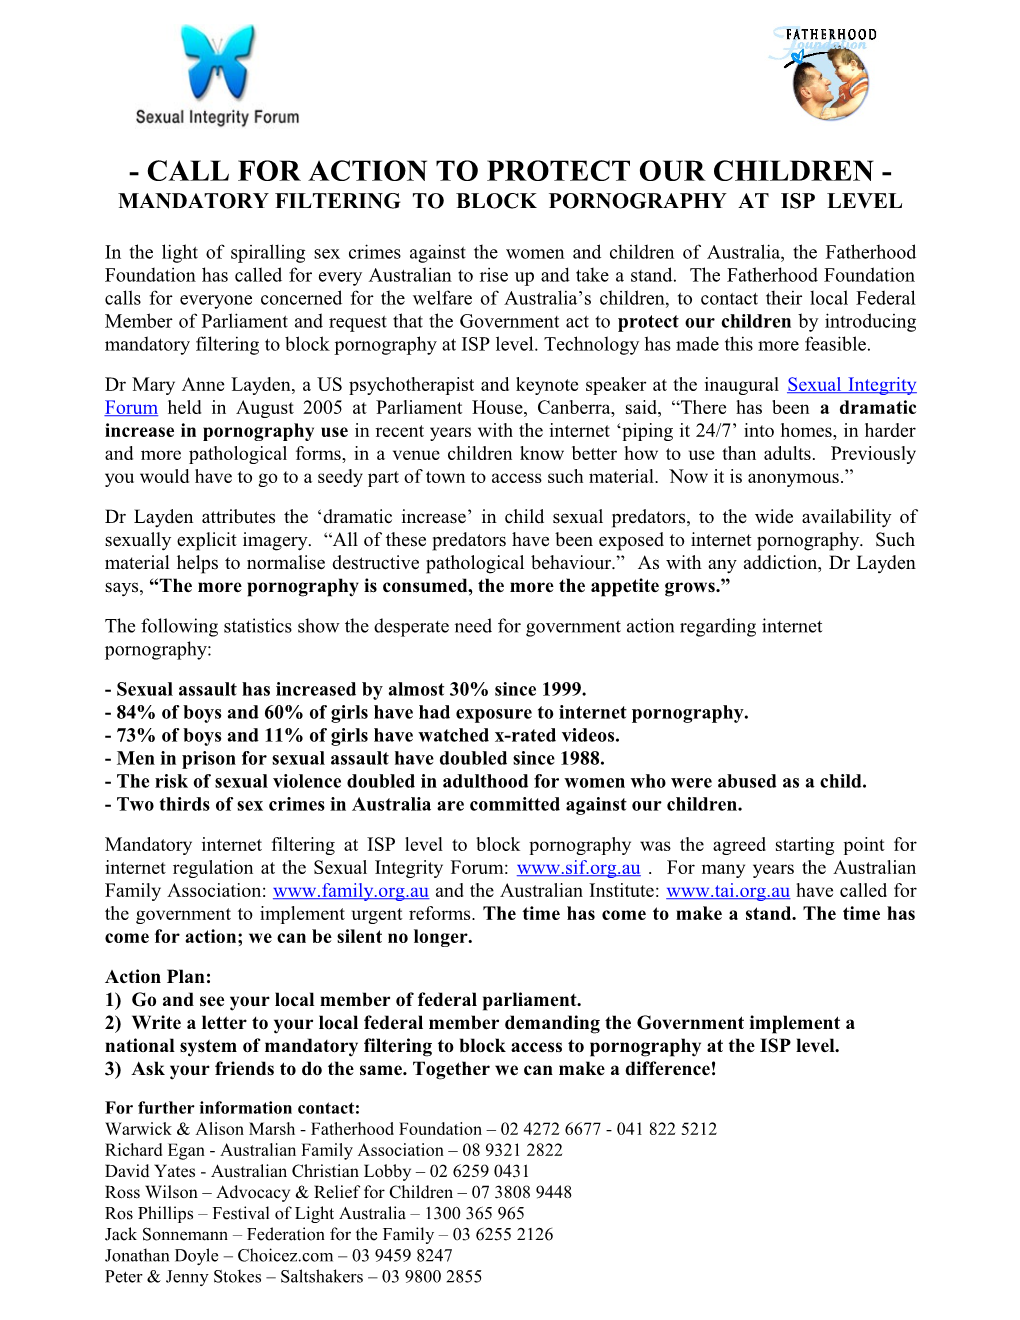 Call for Community Action